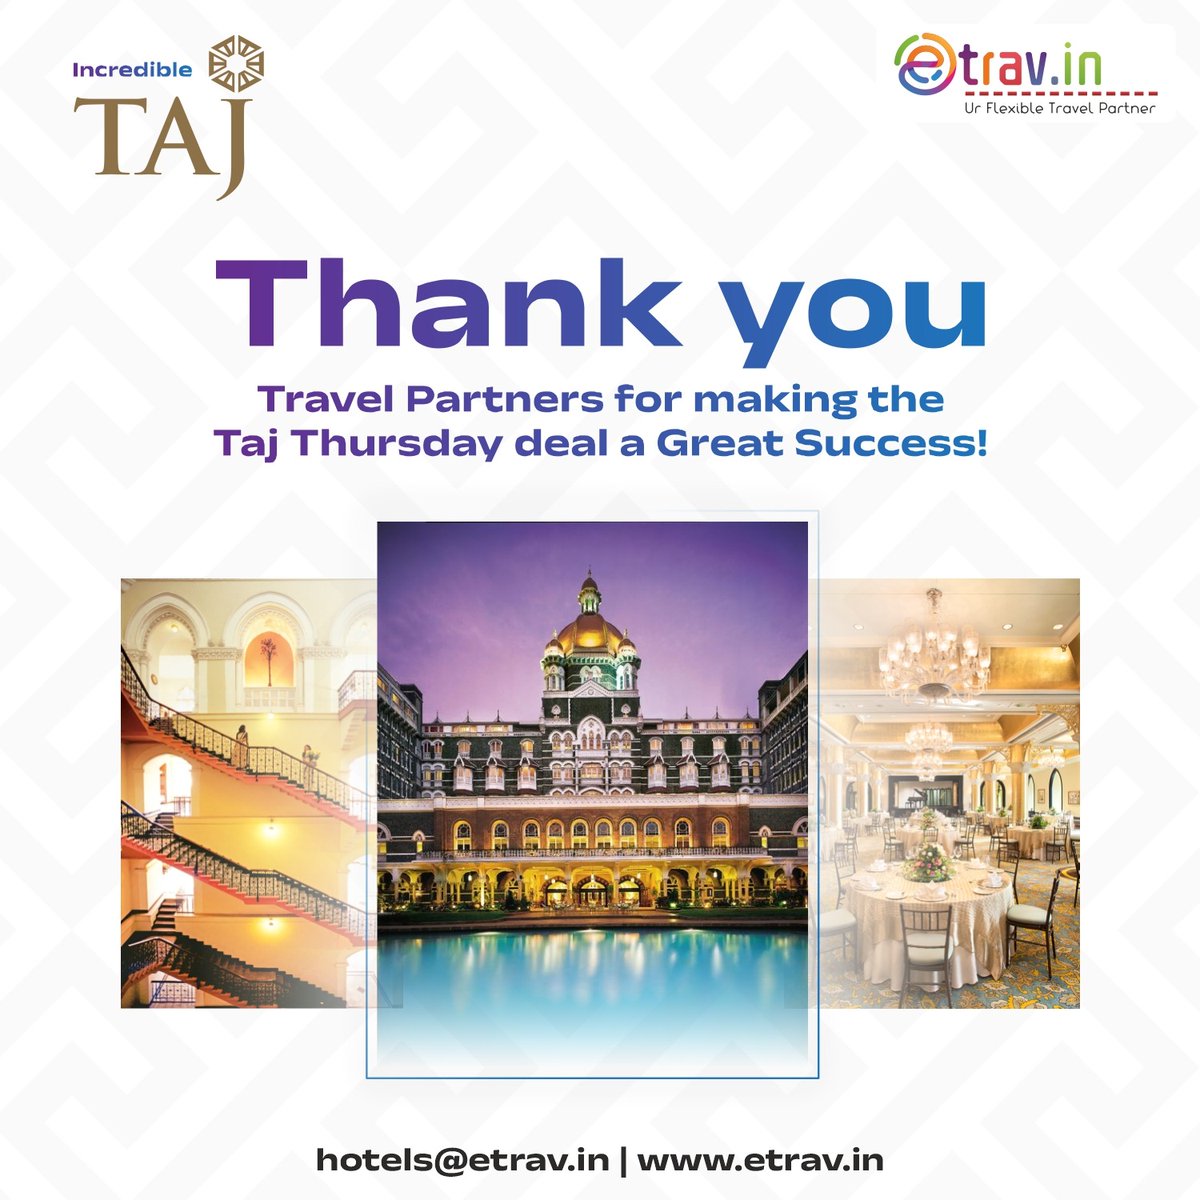 Thank you, Travel Partners for your immense support in making the Taj Thursday deal a Great Success!
 
To get more such deals join our community on WhatsApp: -chat.whatsapp.com/CdeVXvTbMLc7VX…
Website: etrav.in

#tajhotels #tajhoteldeals #hotelbooking #luxurystay #etrav